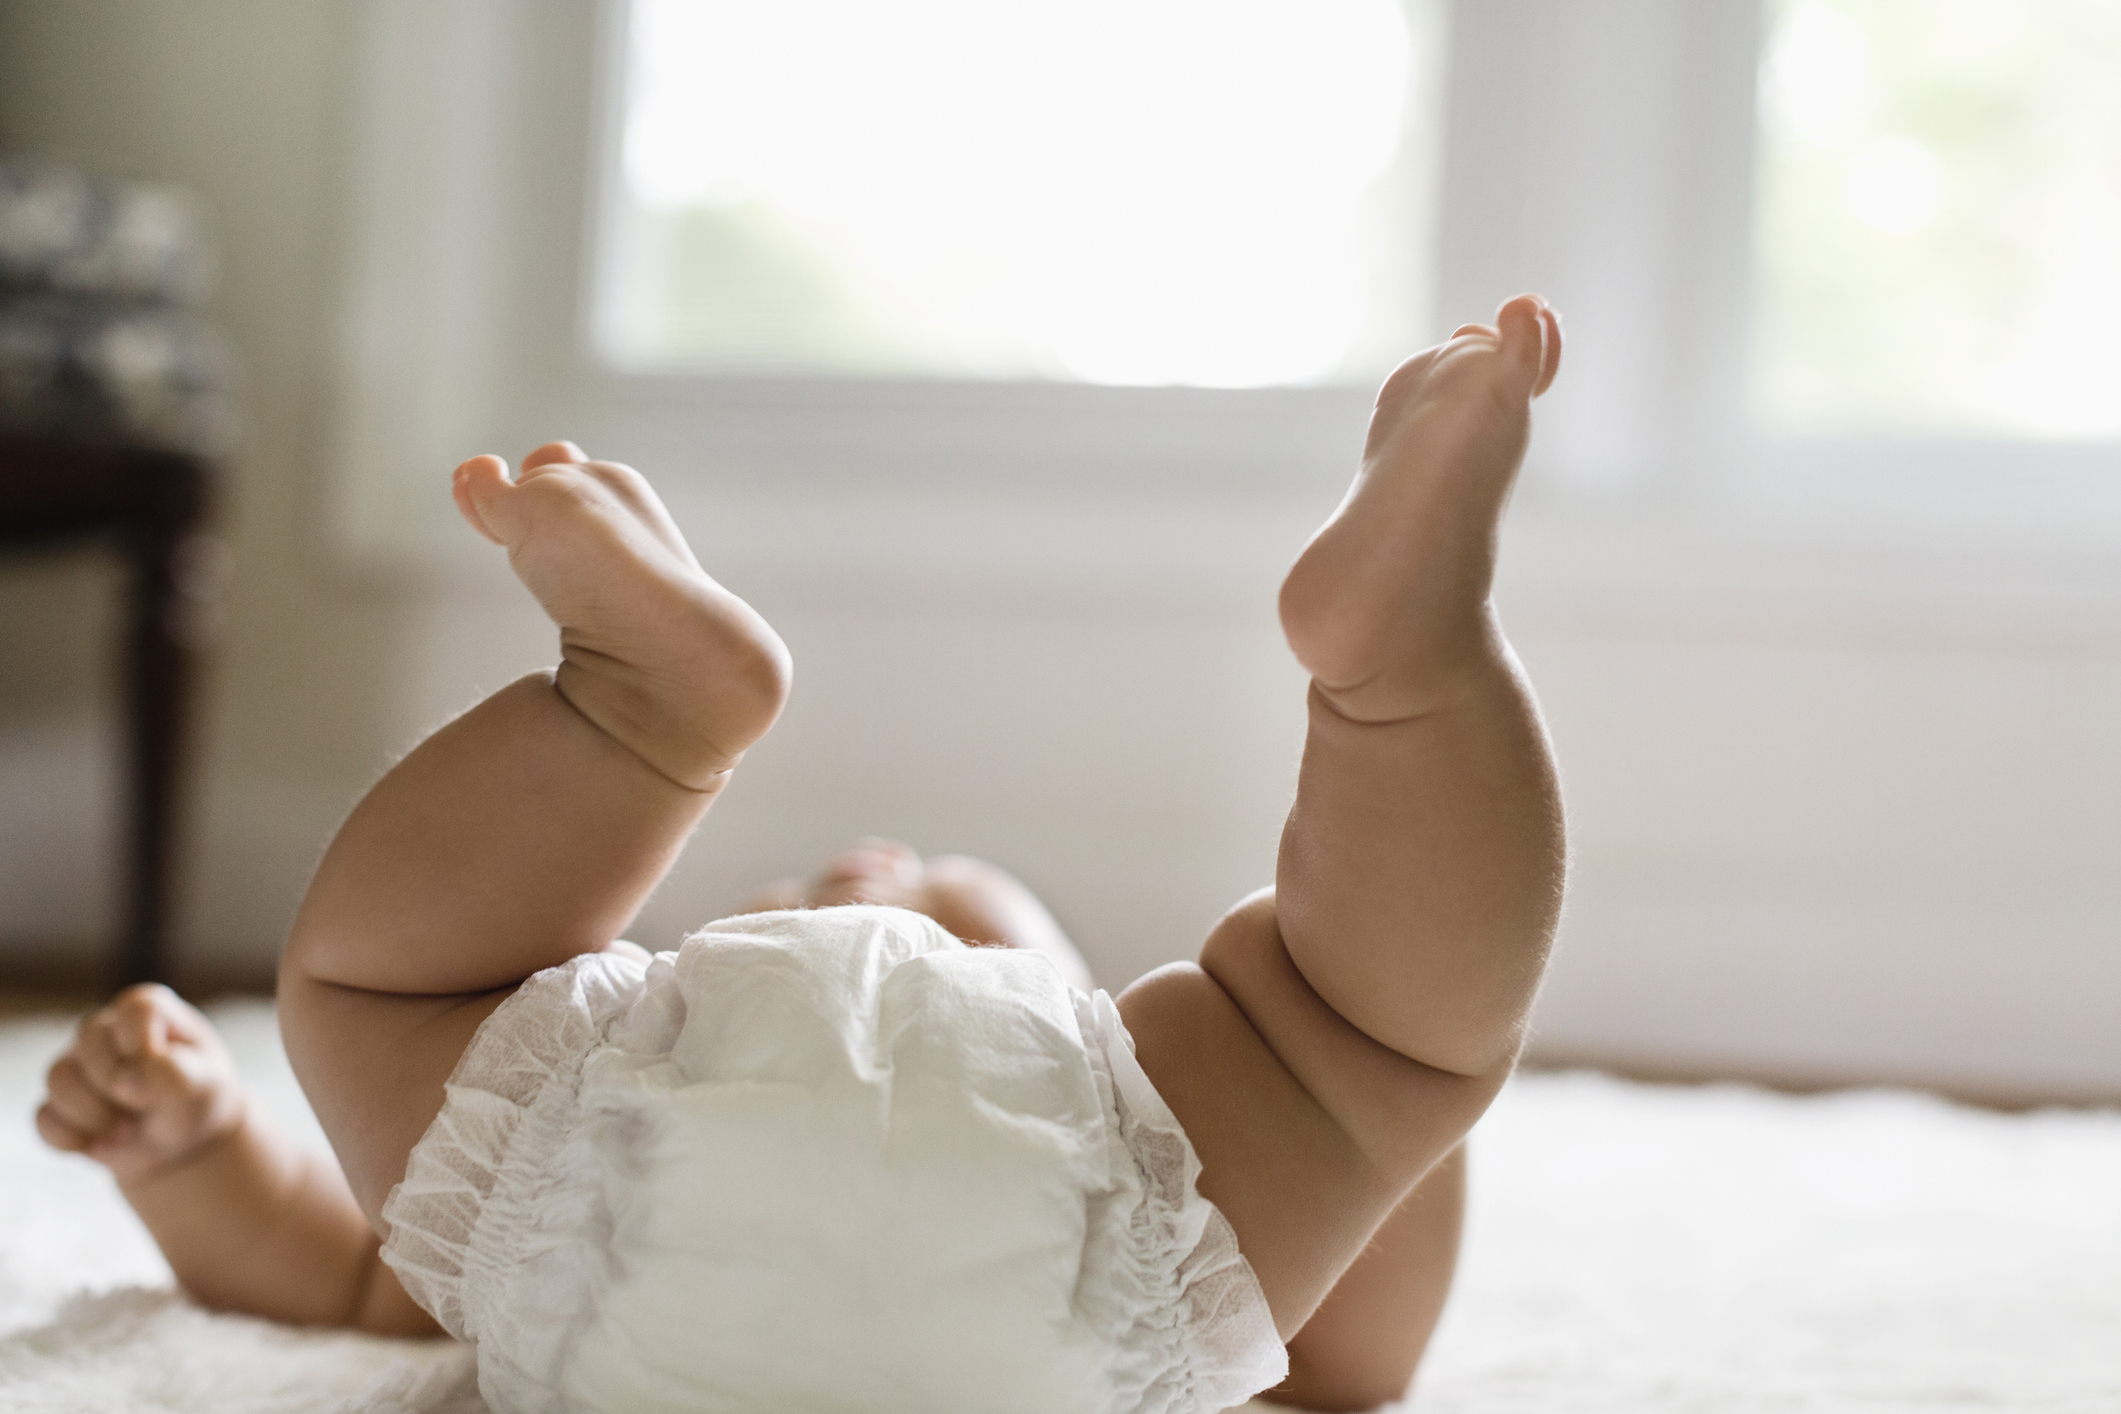 Baby lying on their stomach lifting legs up, in a white diaper, on a soft surface, capturing a playful moment